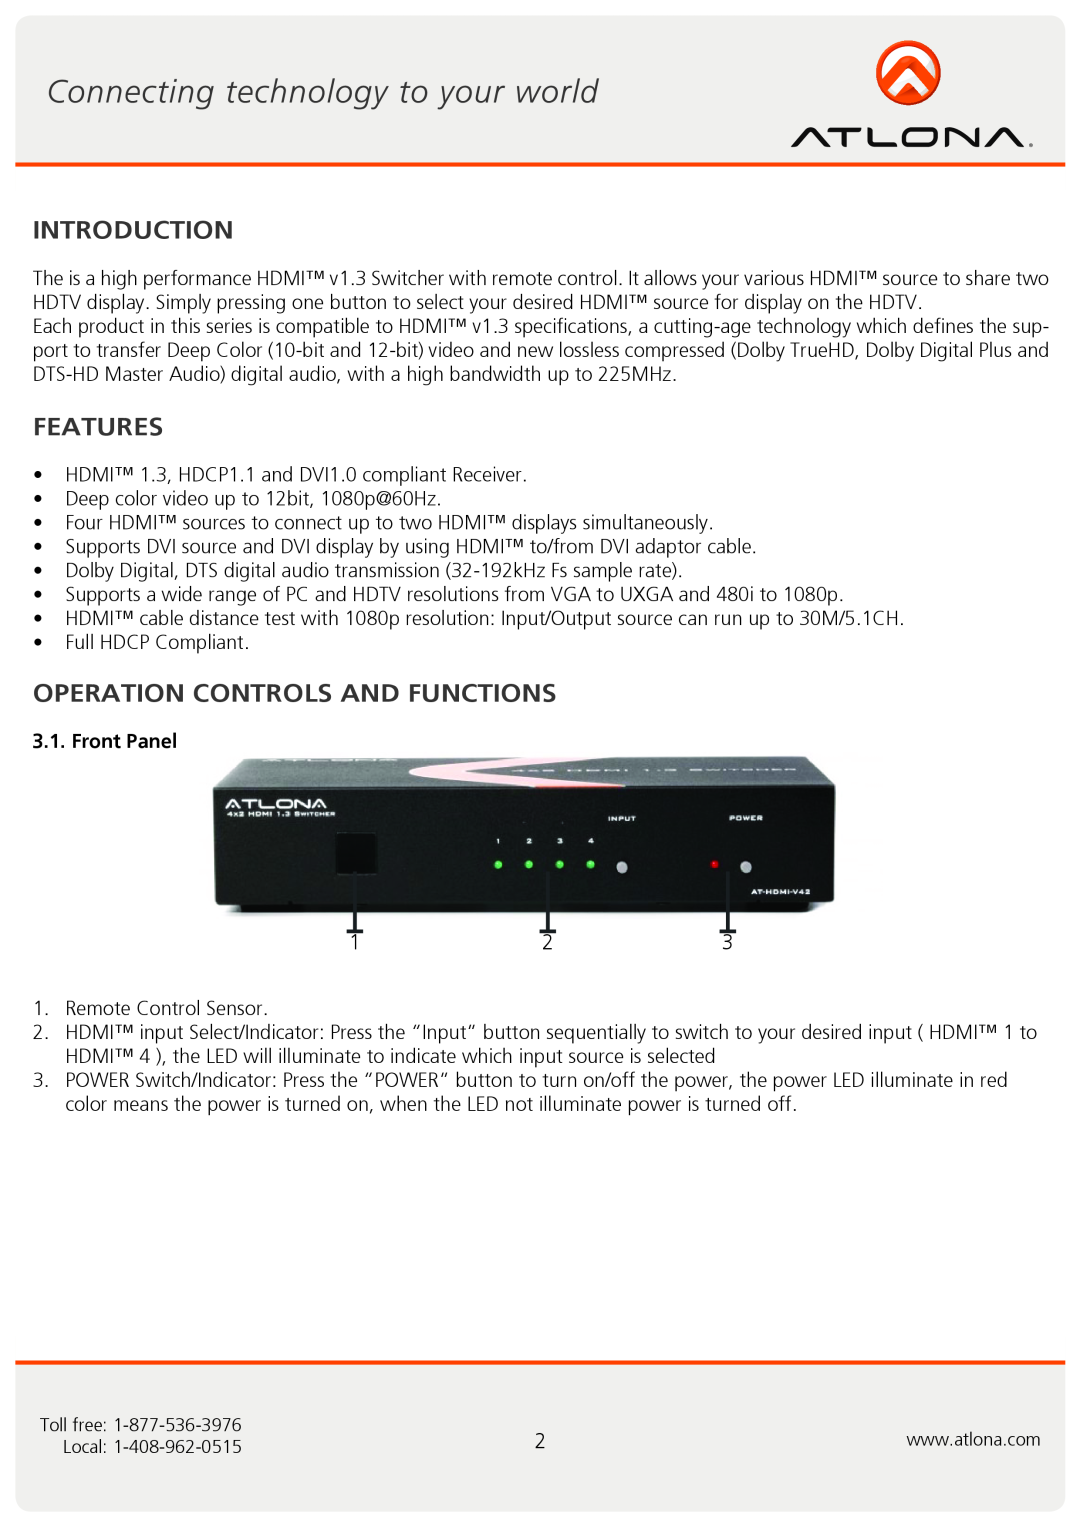 Atlona AT-HDMI-V42 user manual Introduction, Features, Operation Controls And Functions, Front Panel 